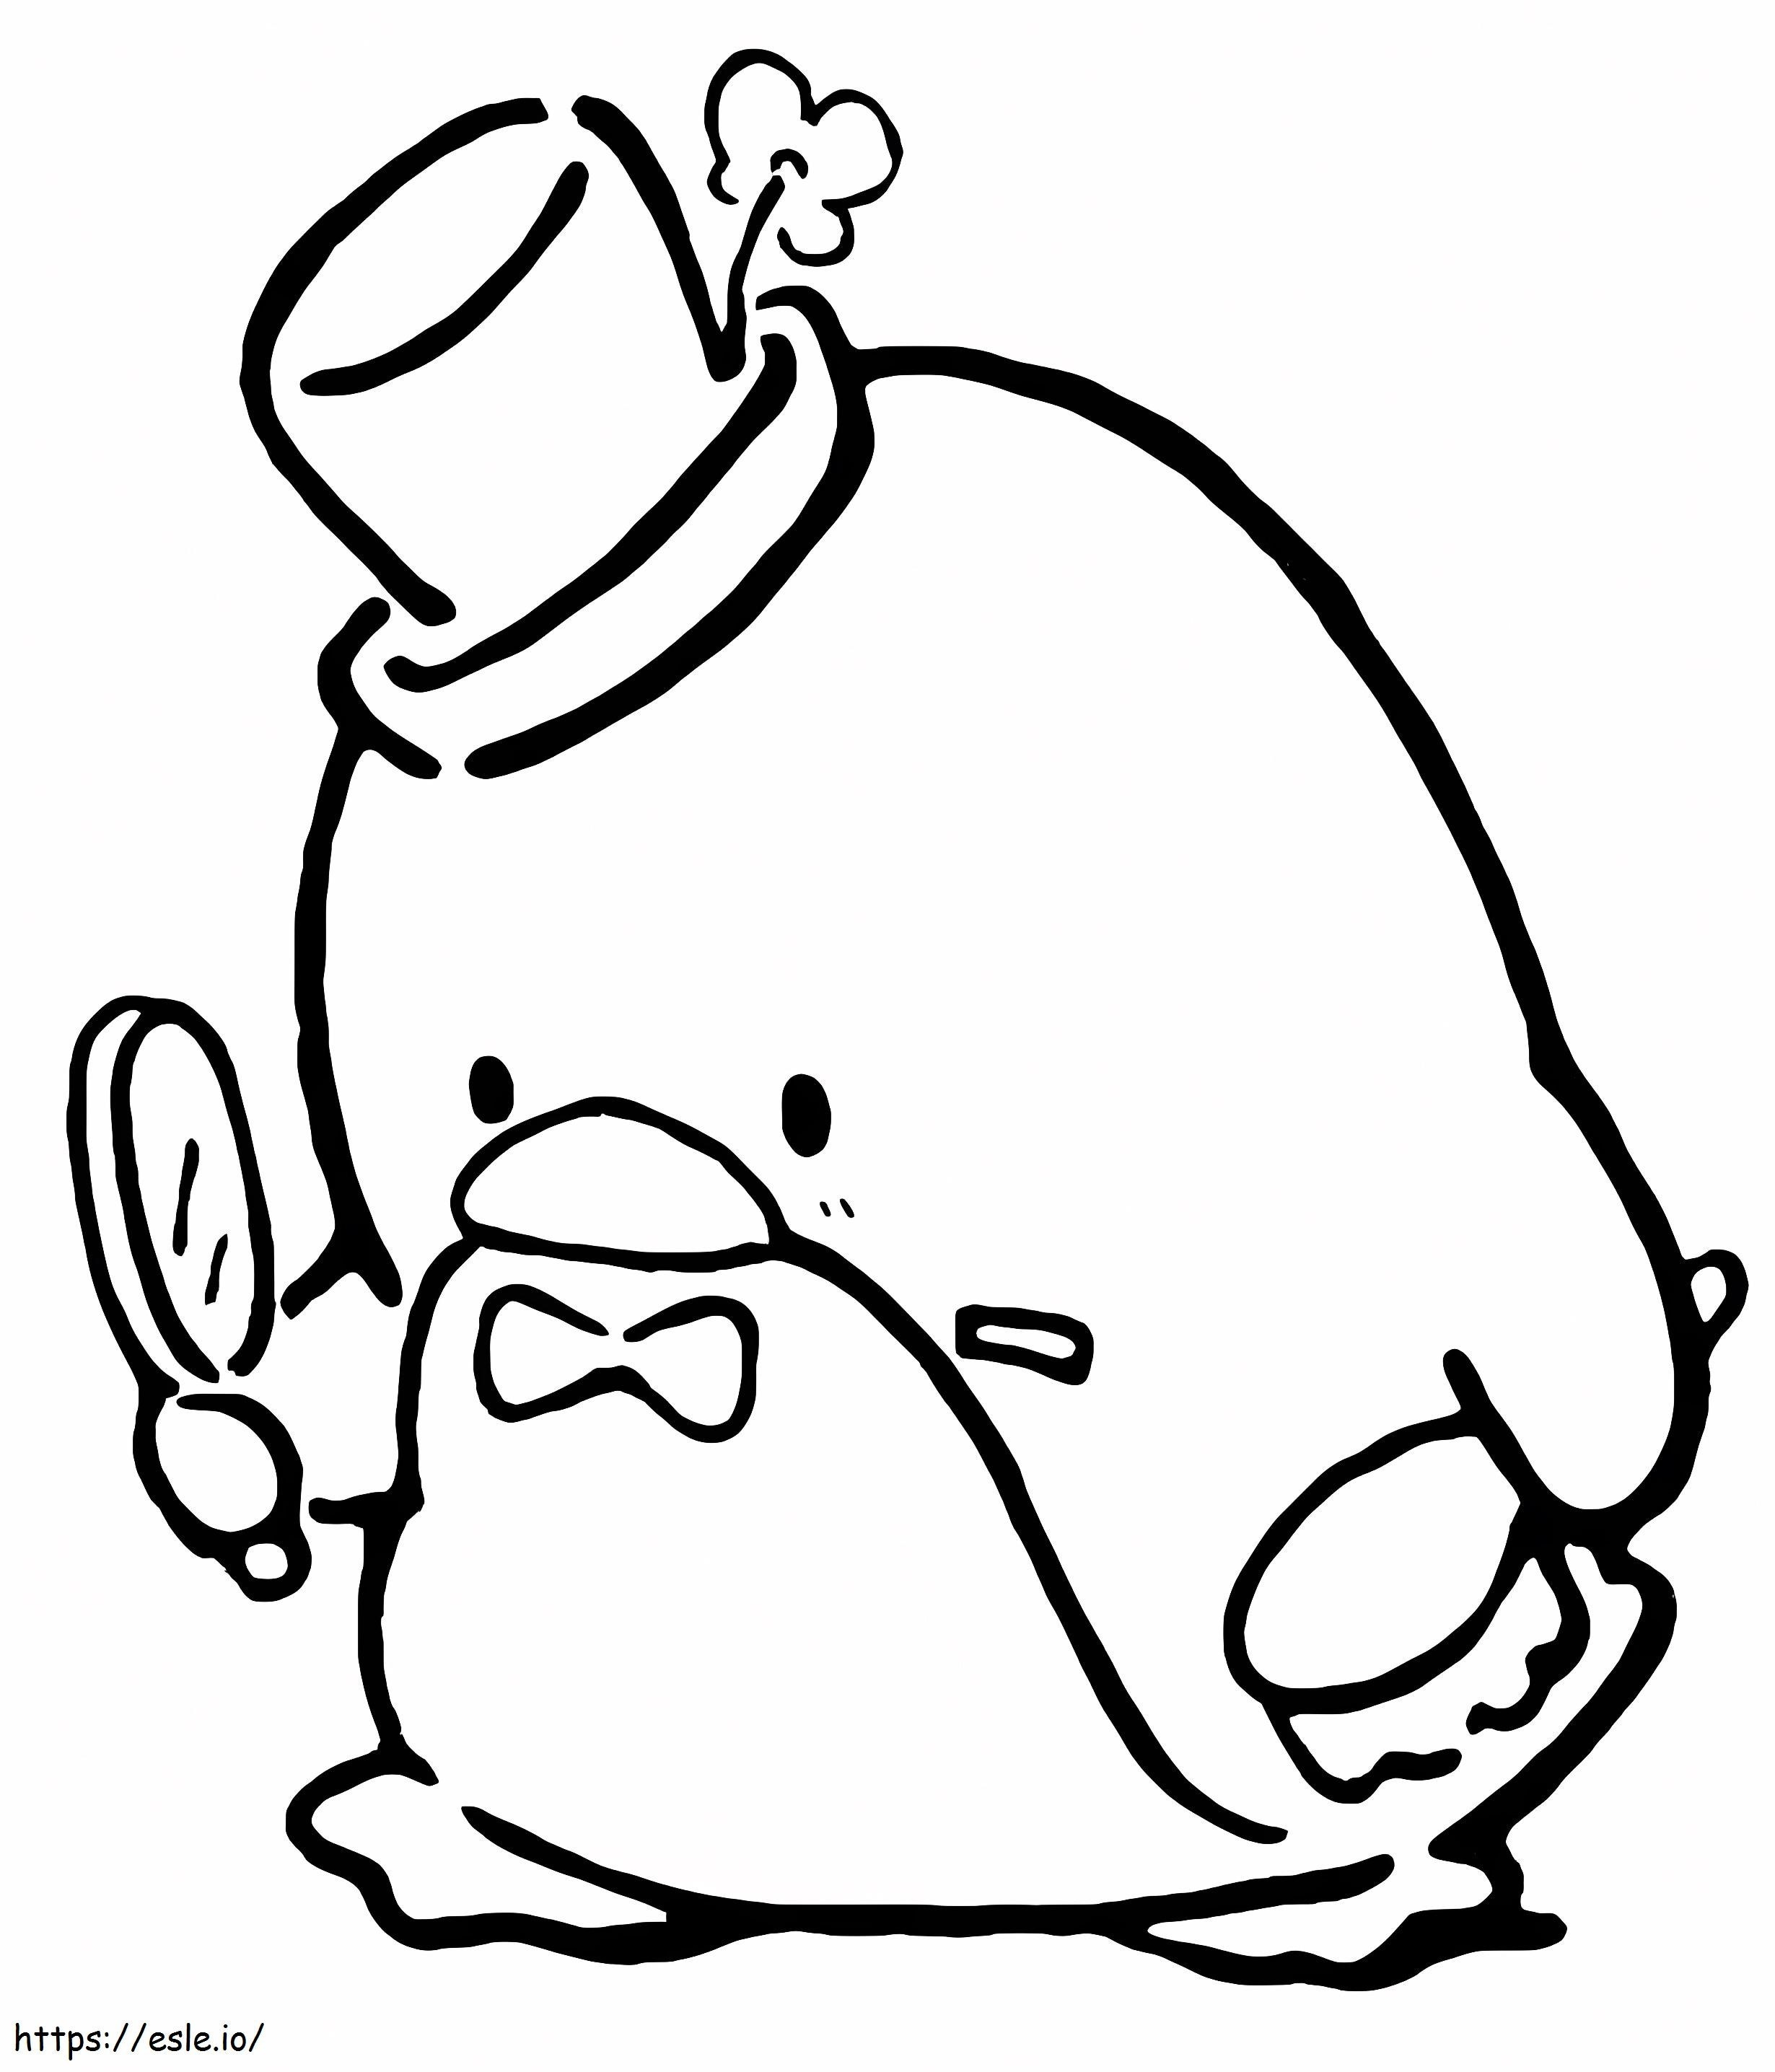 Tuxedo Sam For Kids coloring page